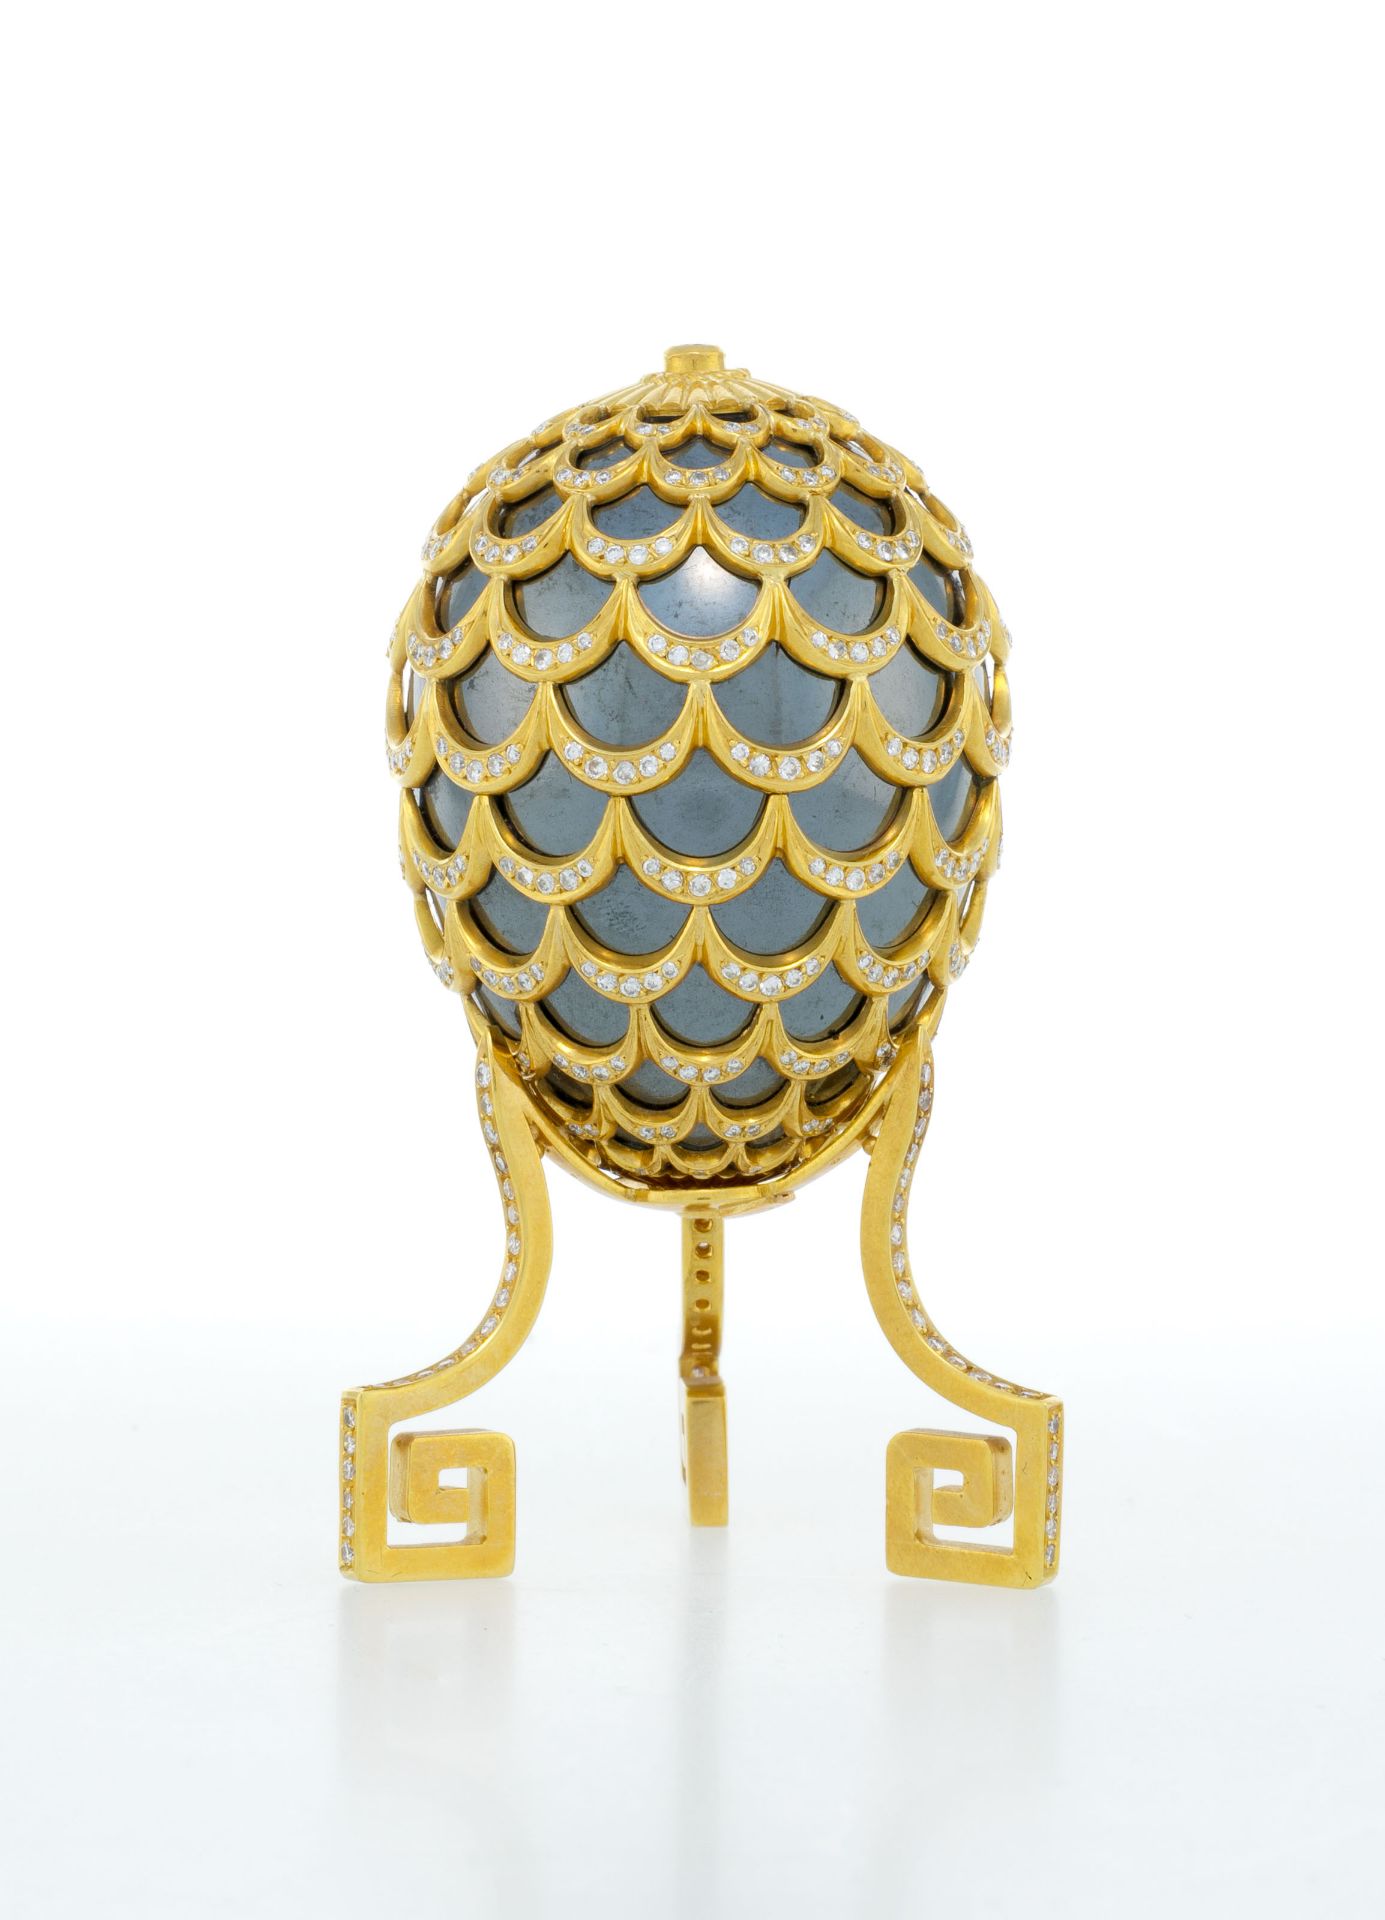 Adler, ornamental egg hematite covered by a pine cone pattern in 18K gold, on its base, set with rou - Image 2 of 2